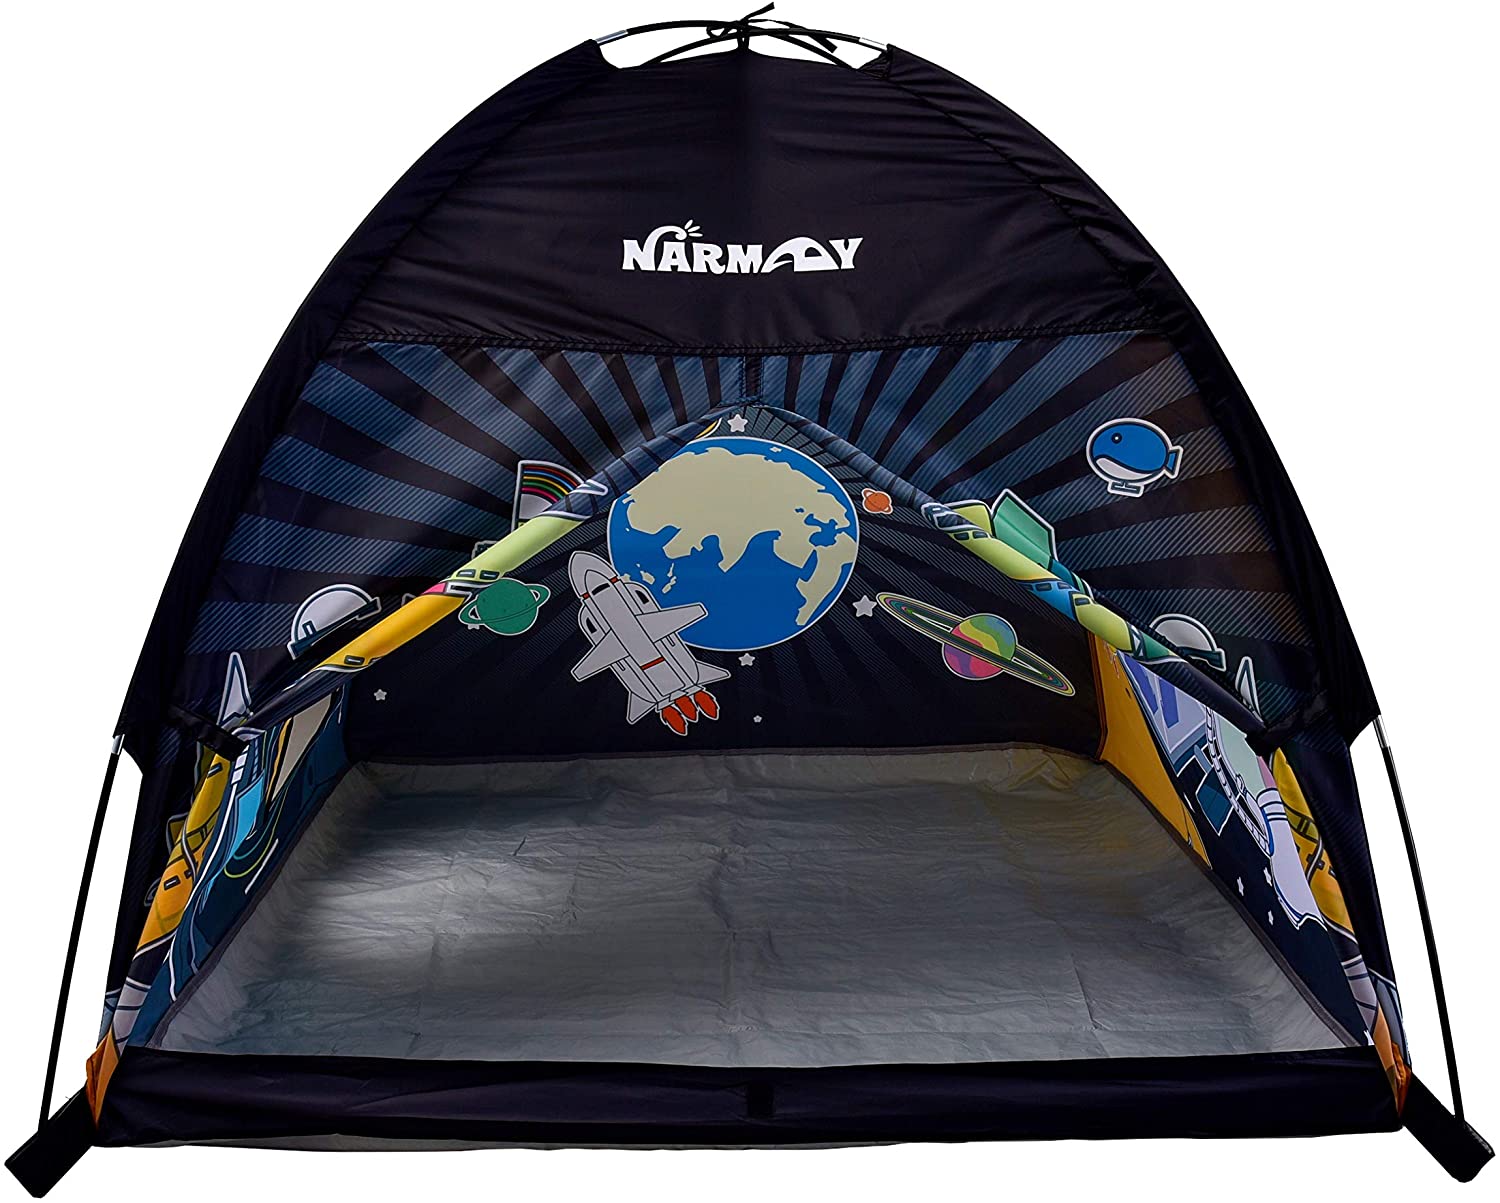 Play Tent Space World Dome Tent For Kids Indoor Outdoor Fun 48 X 48 X 40 Inch 1886091 08 ?v=637423350723768127